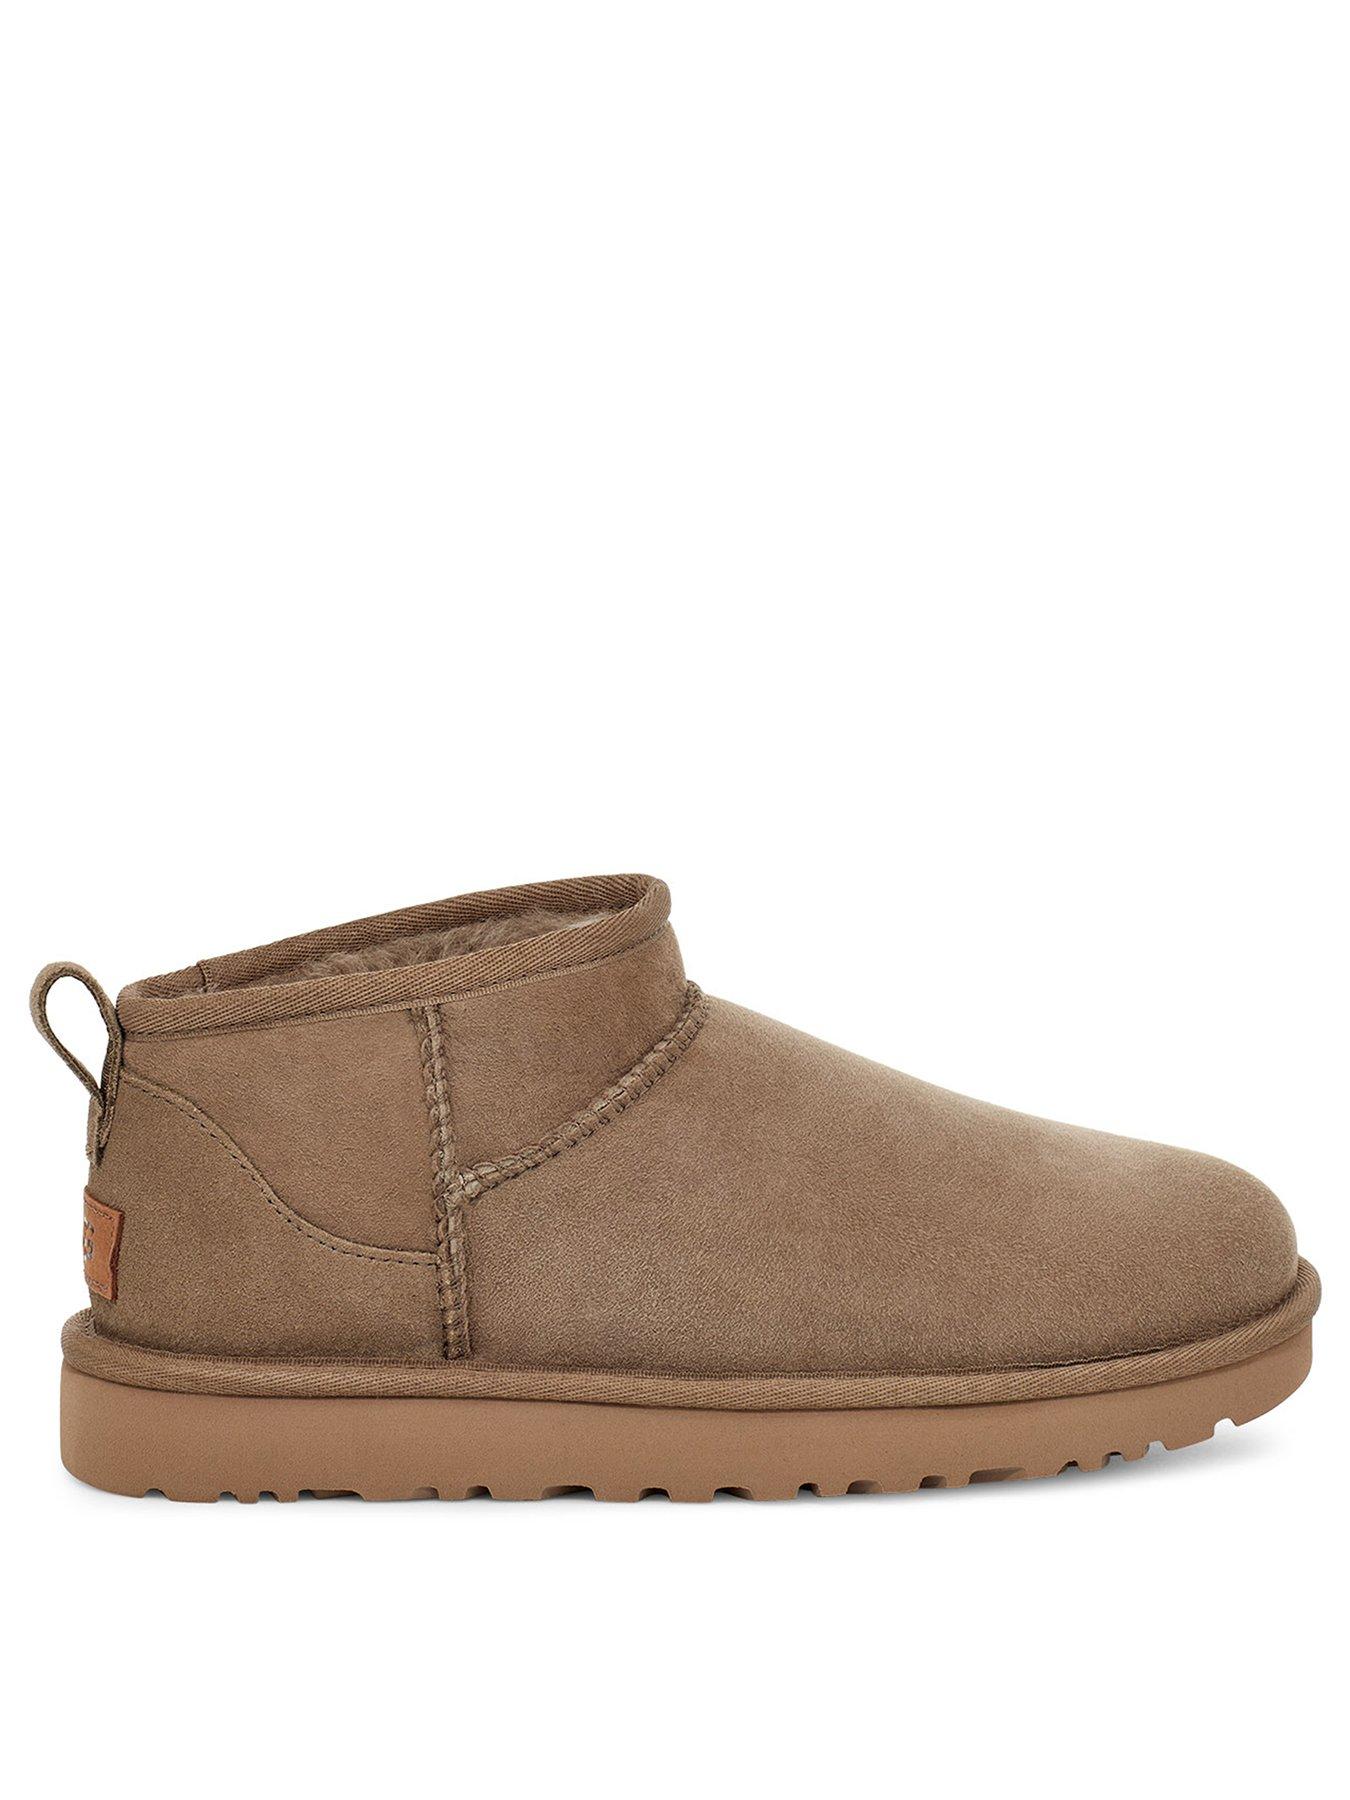 UGG Classic Ultra Mini Ankle Boot - Antelope | littlewoods.com